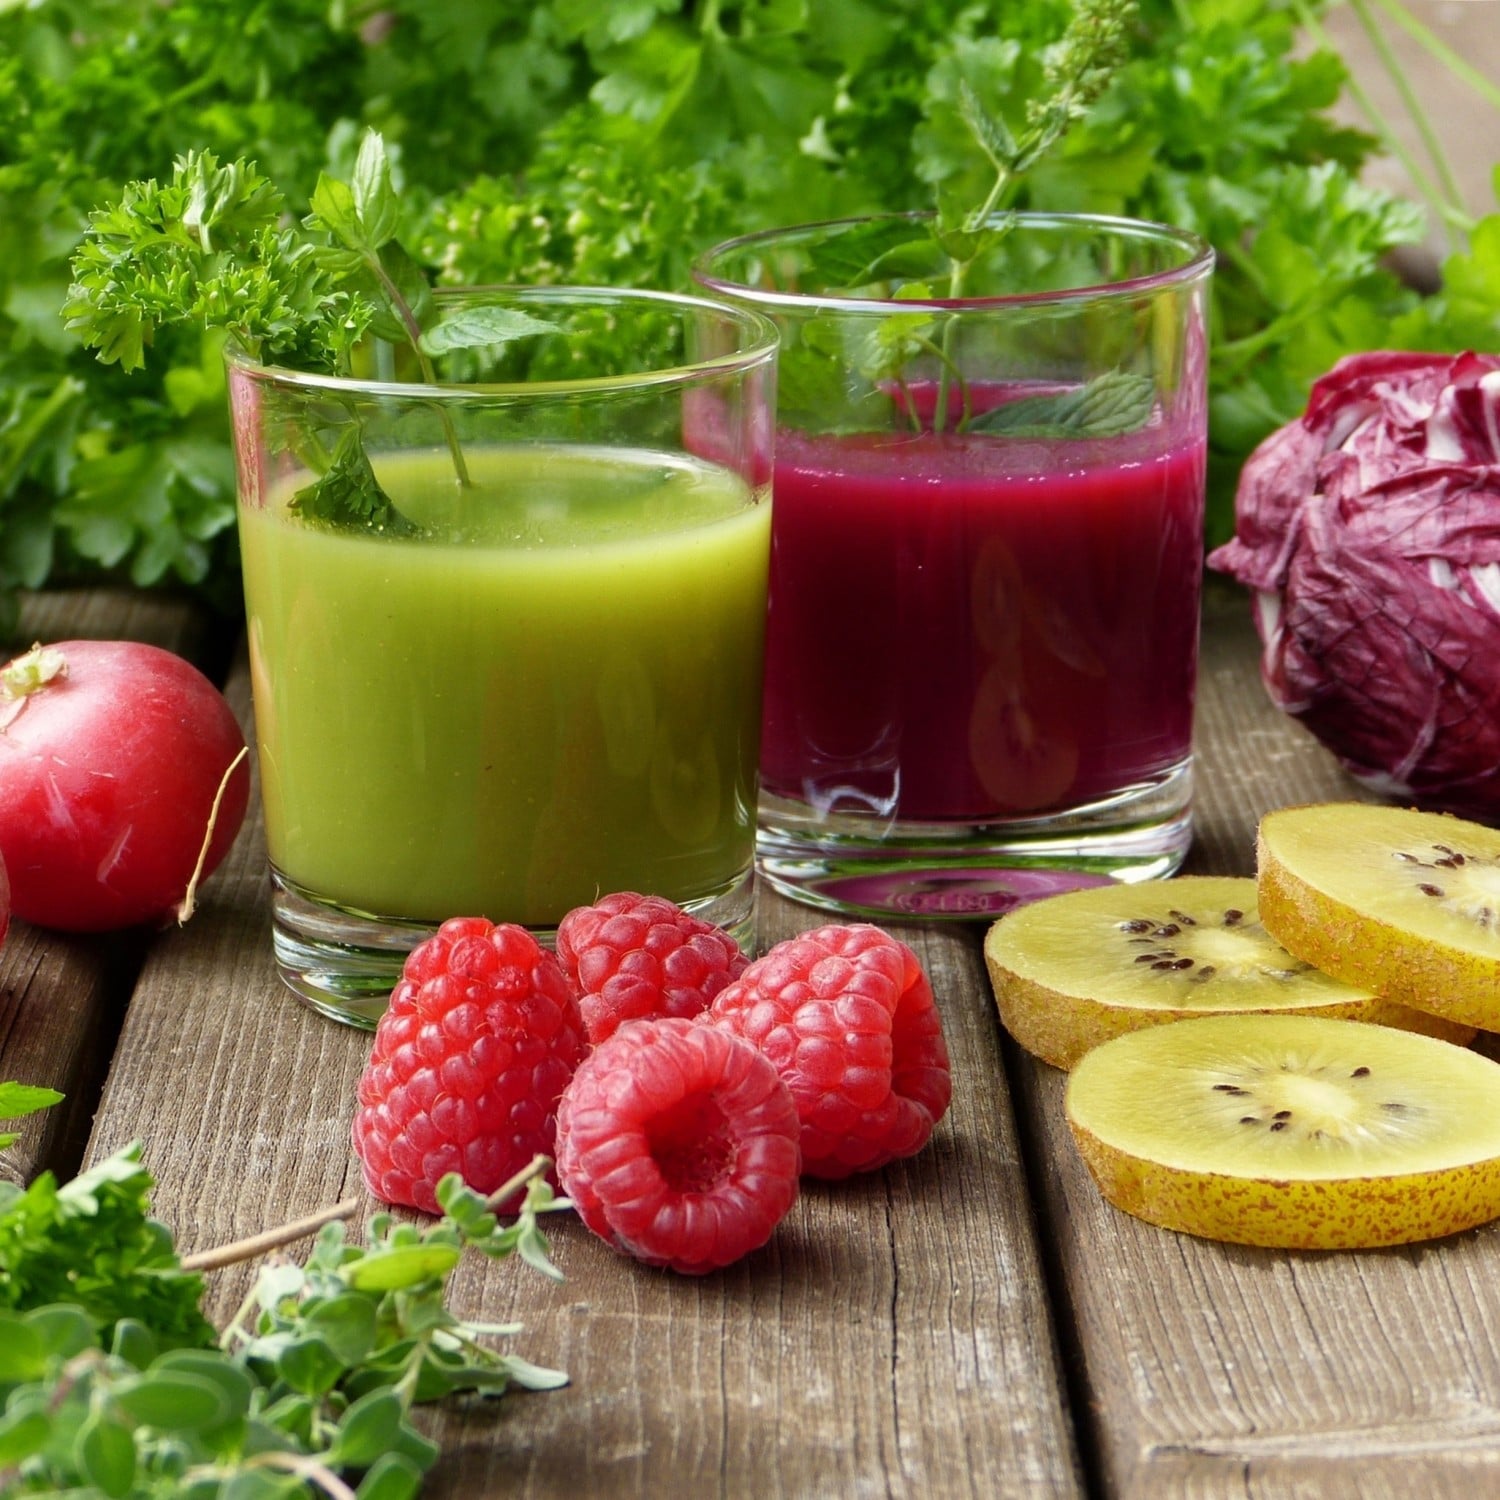 vitamins and minerals found in fruits and vegetables